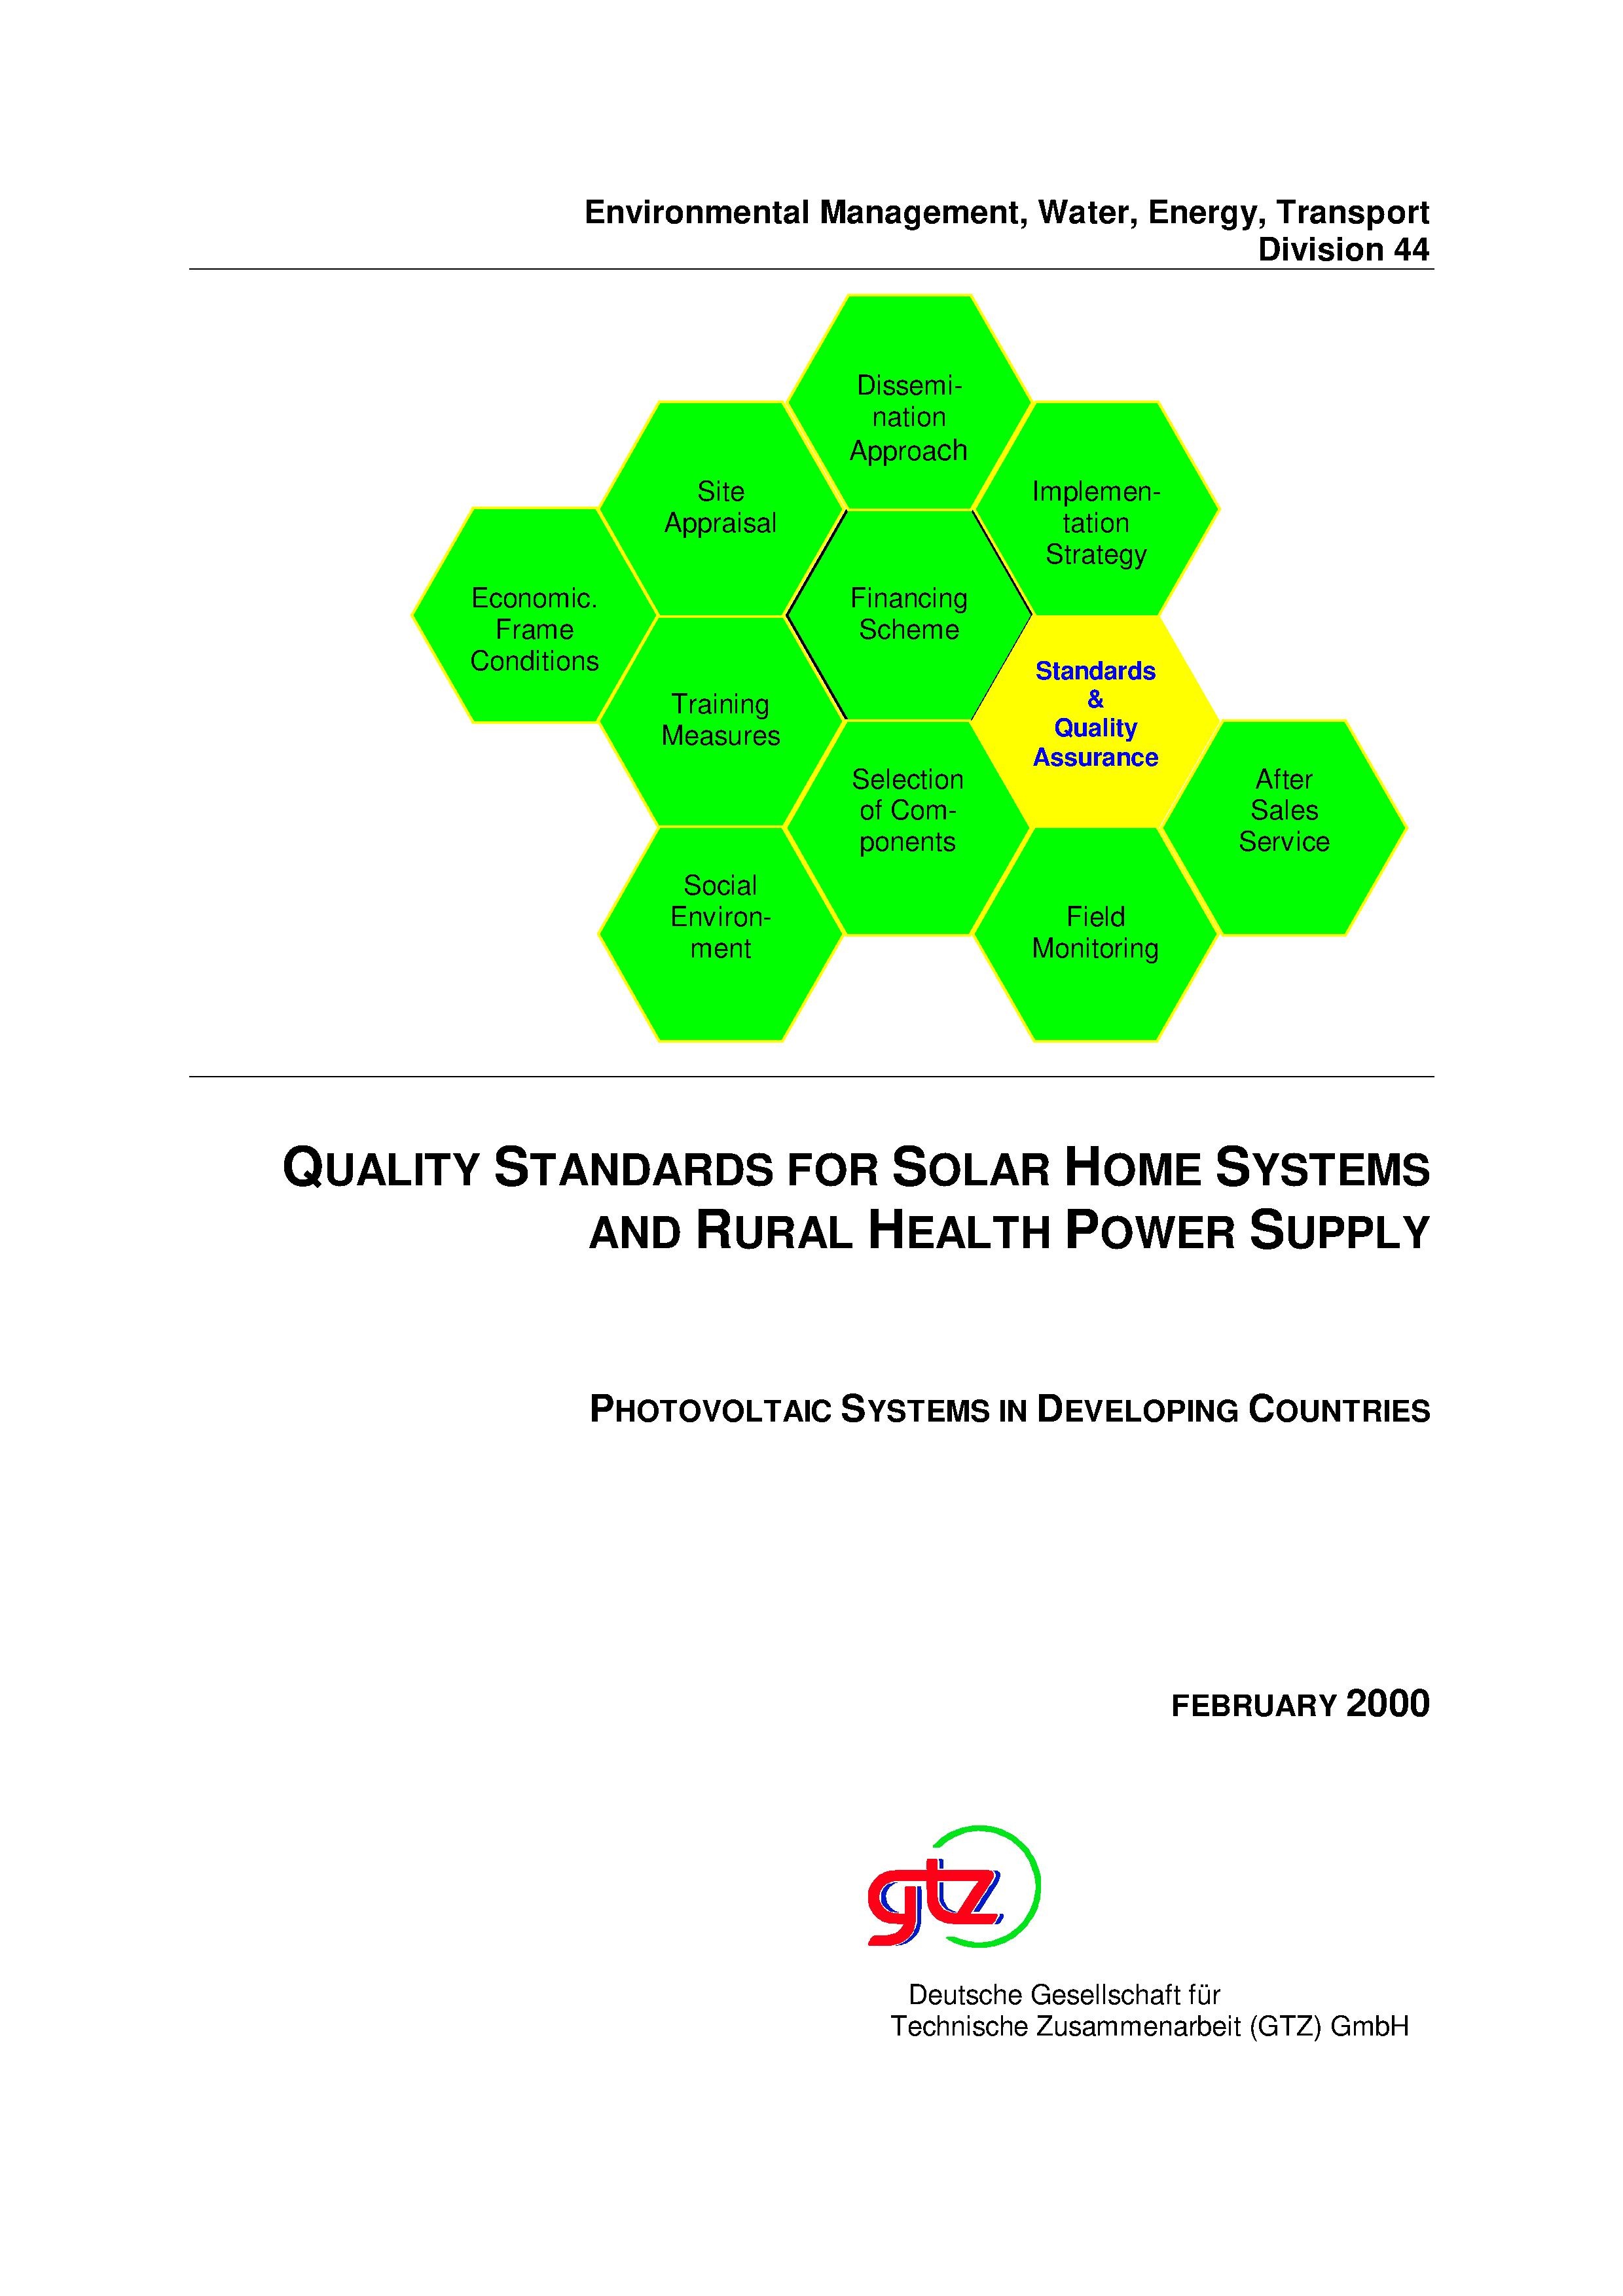 Gtz quality standards for solar home systems and rural health power supply.pdf GTZ,Division 44, Environmental Management, Water, Energy, Transport:Quality Standards for Solar Home Systems and Rural Health Power Supply. Photovoltaic Systems in Developing Countries, February 2000